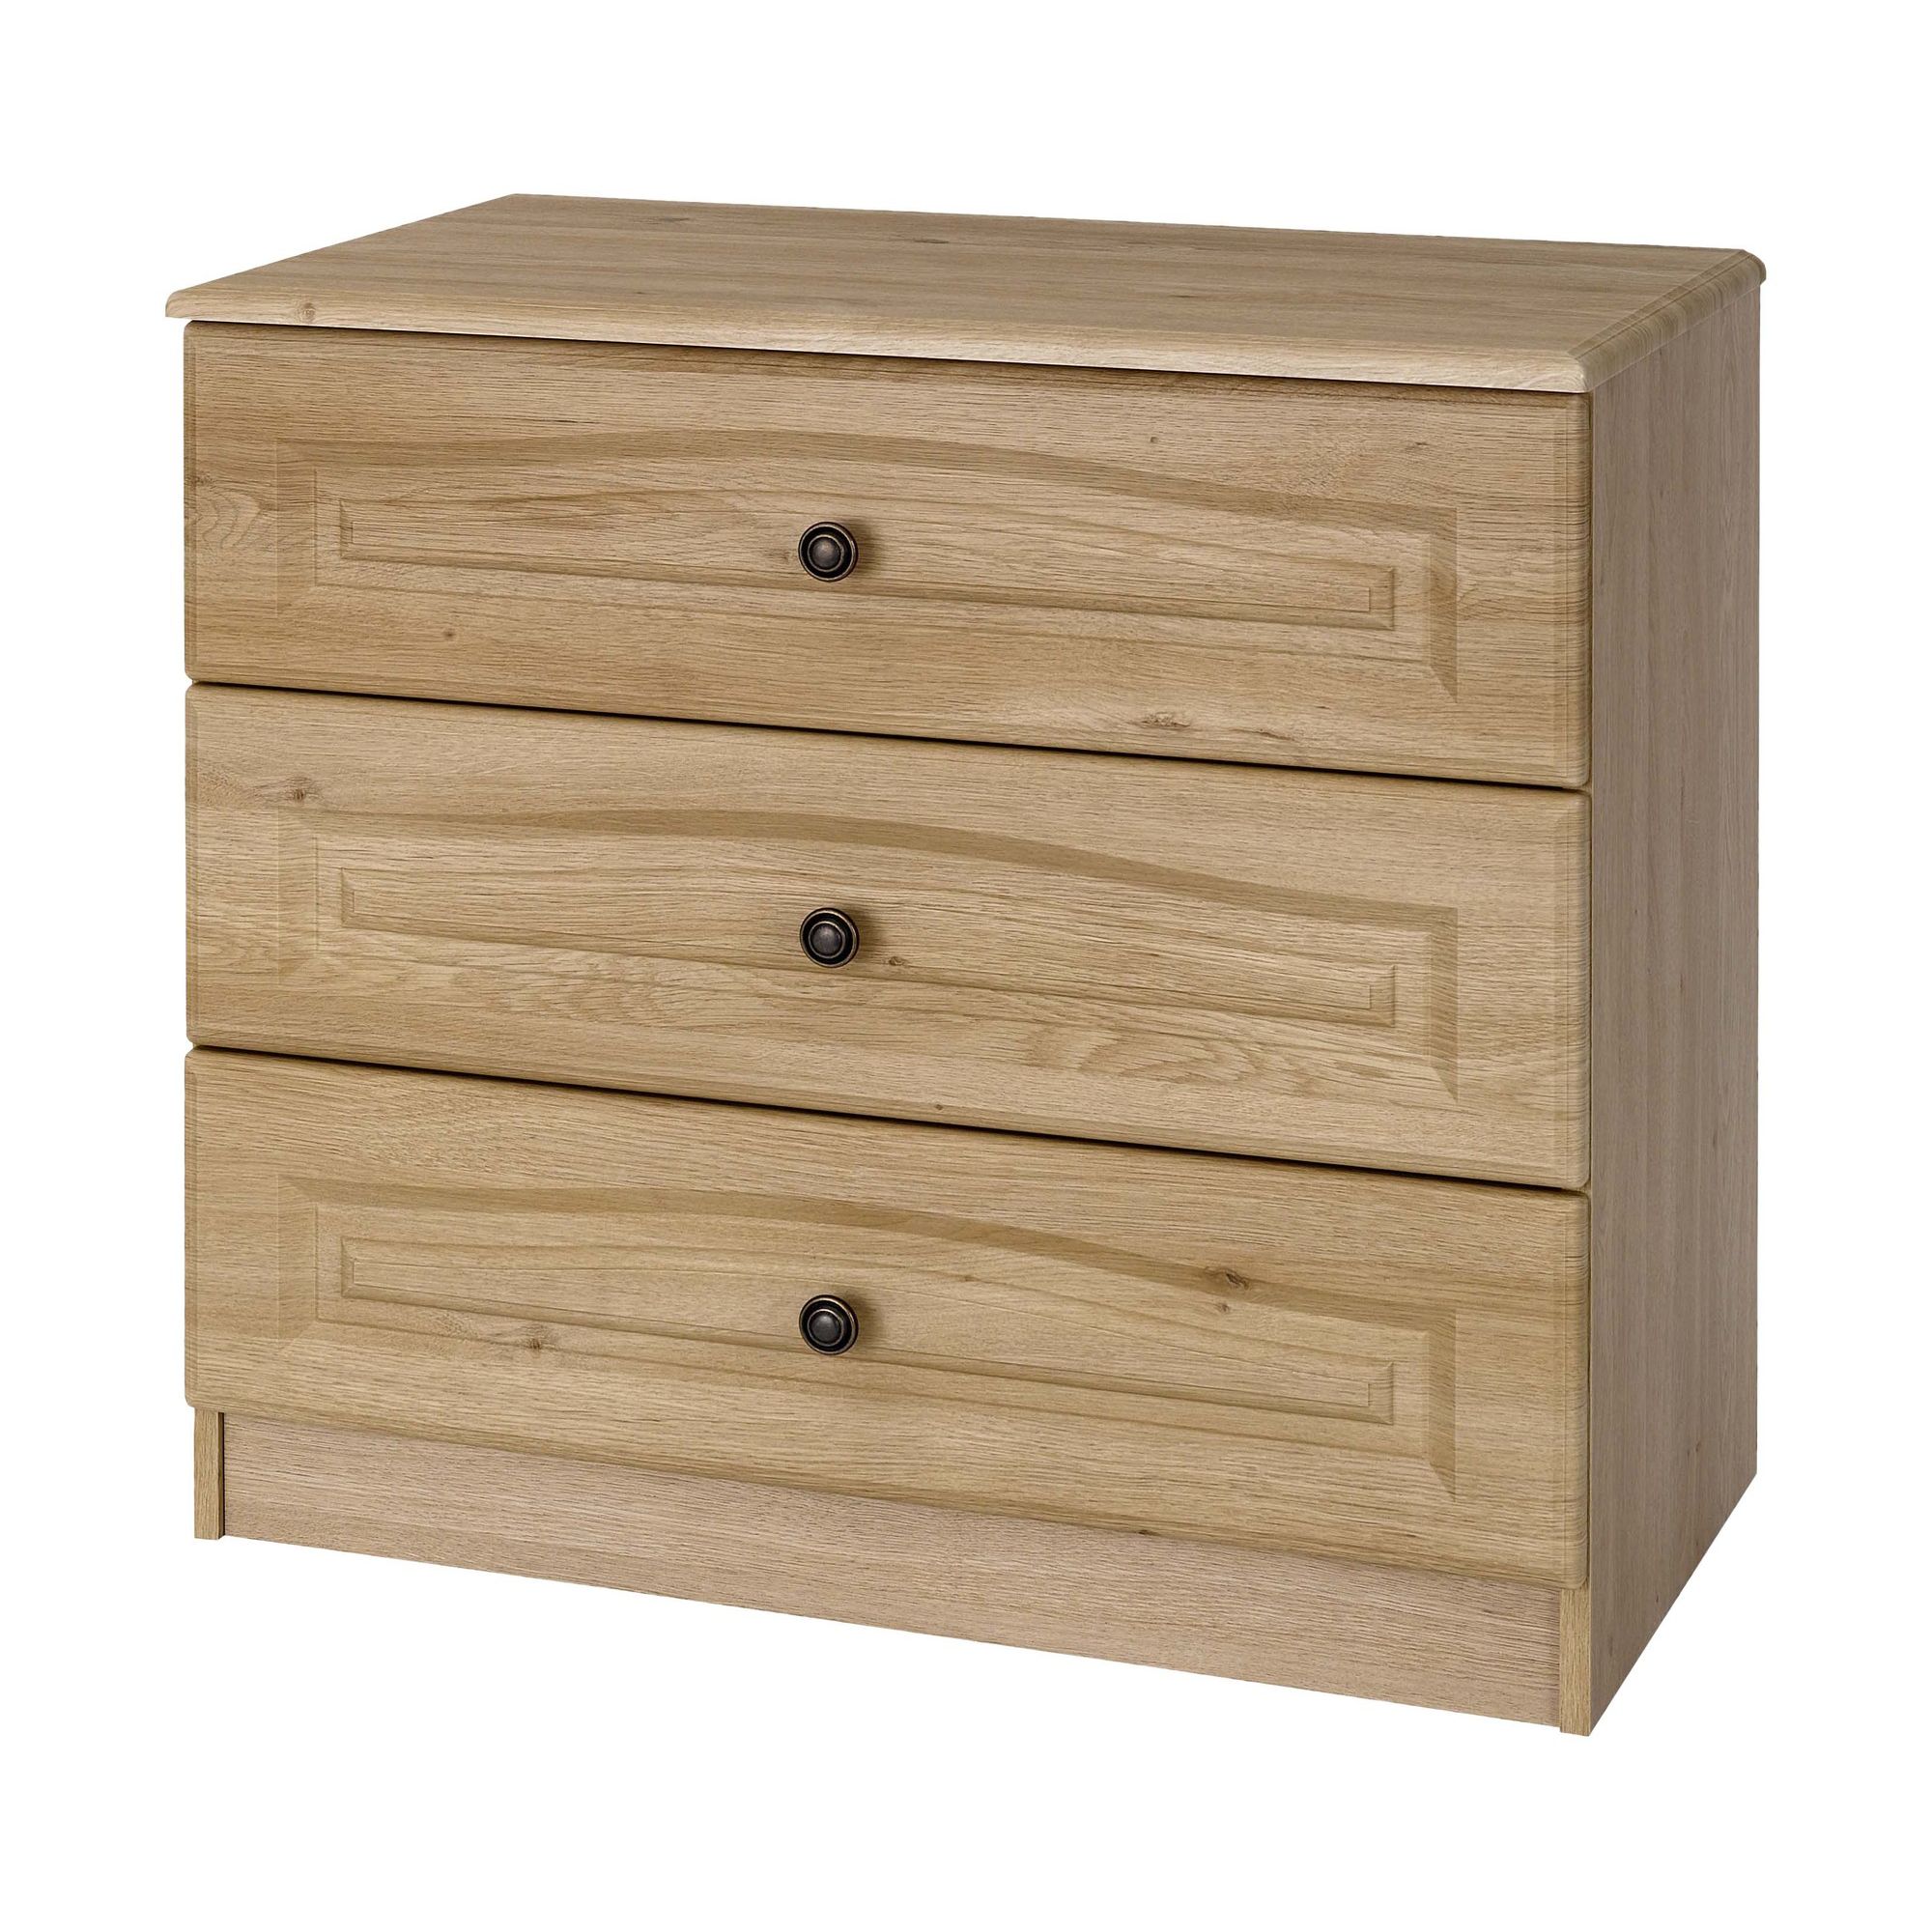 Alto Furniture Visualise Bordeaux Three Drawer Chest in Oak at Tesco Direct